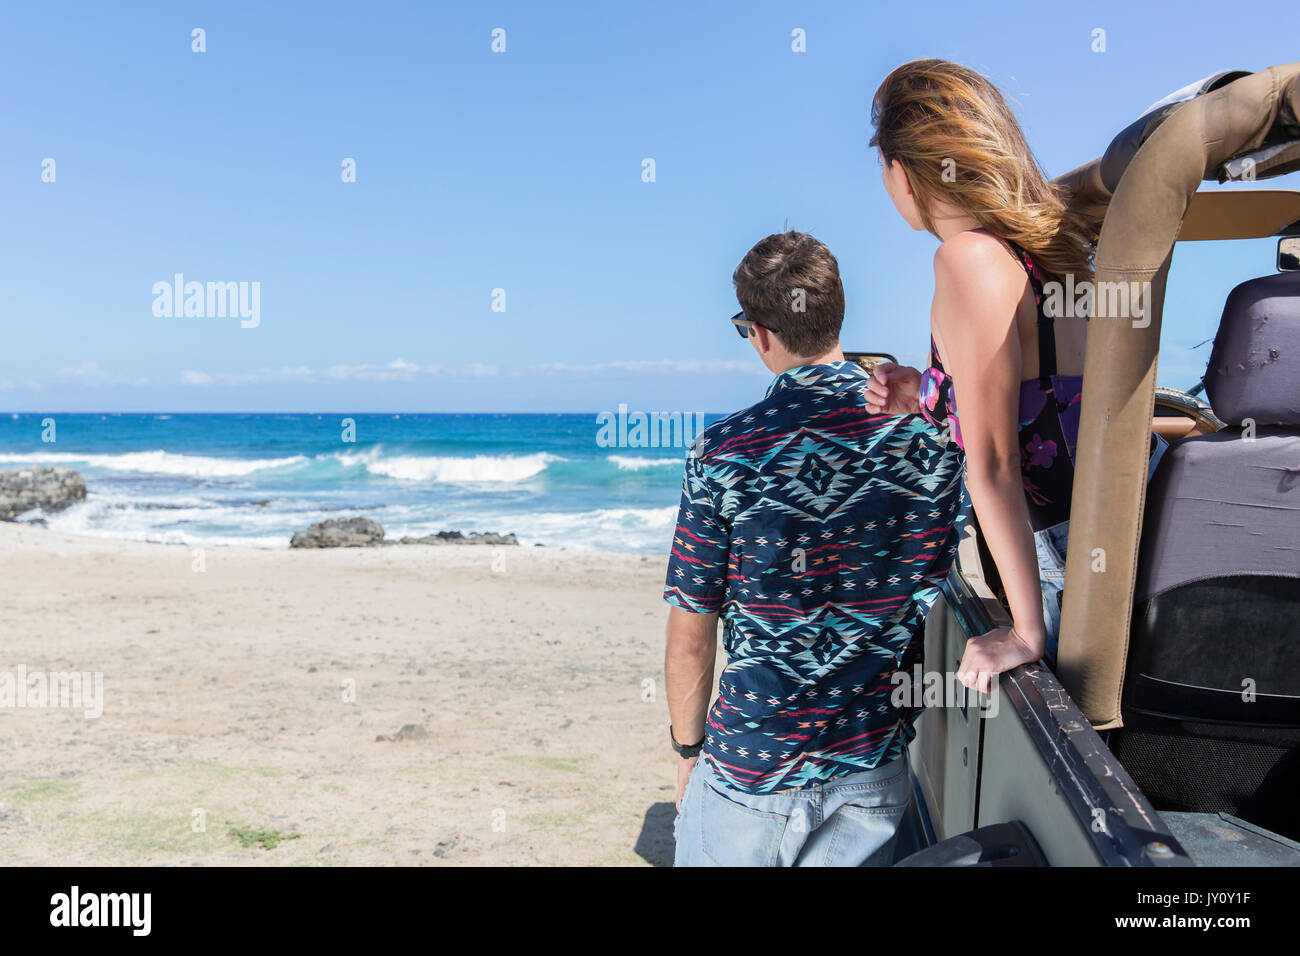 Couple leaning on convertible car at beach Stock Photo